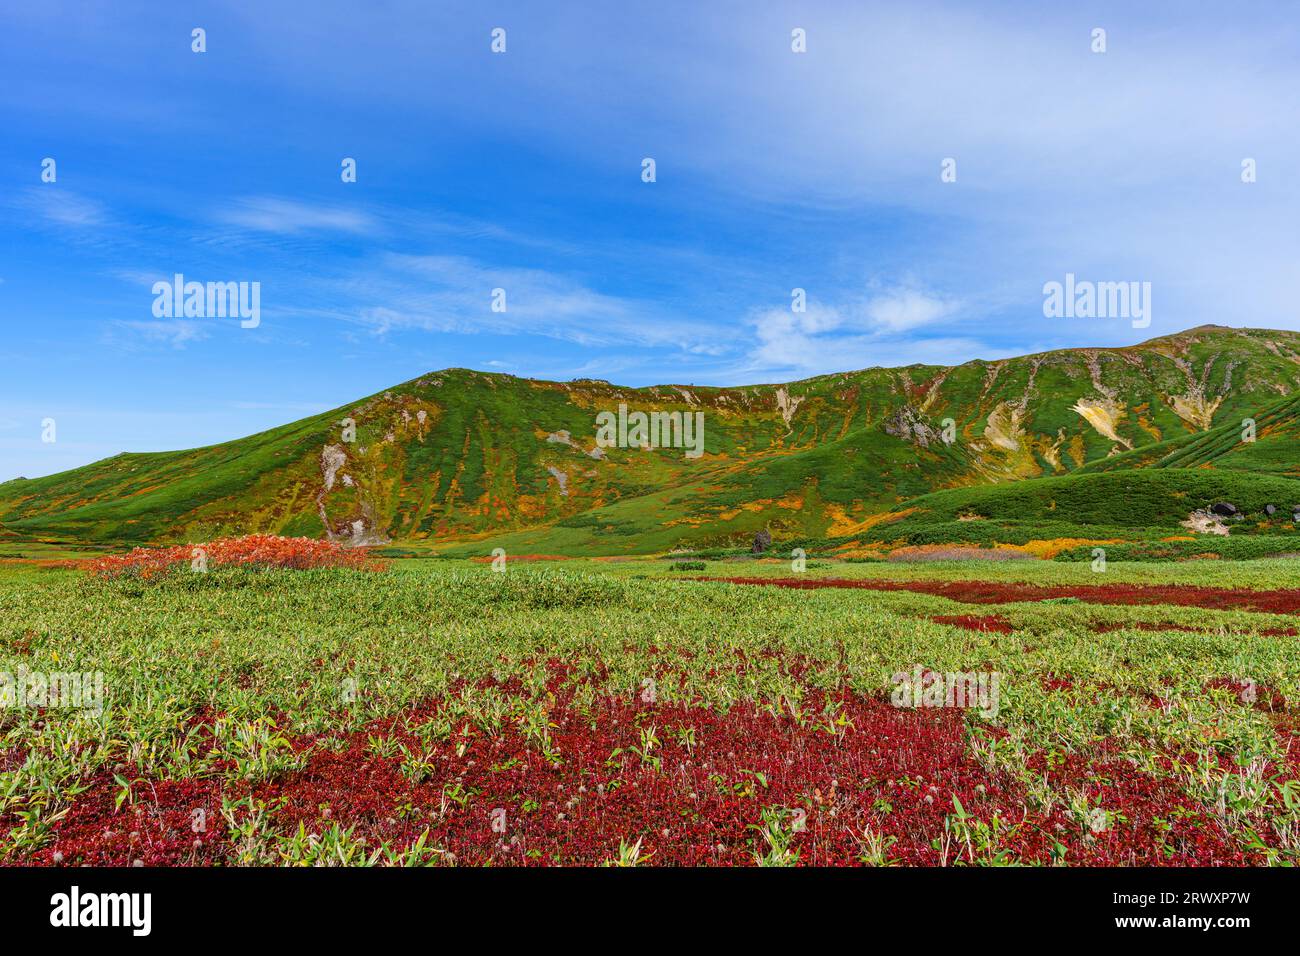 Blue sky, Susoai-daira Plateau, and red leaves of red-flowered camellia Stock Photo